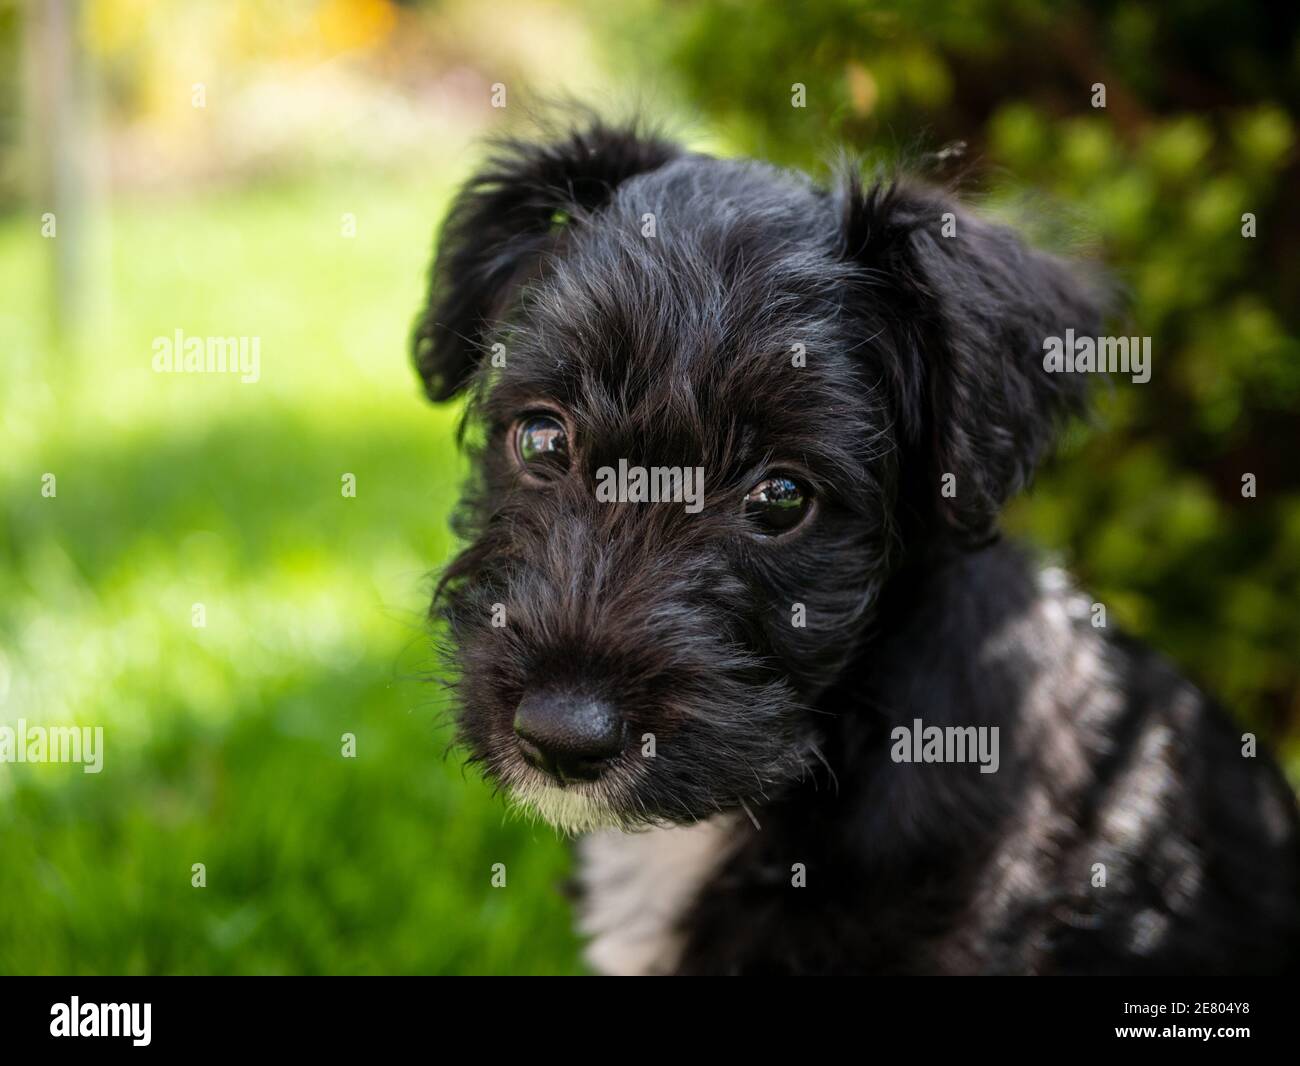 Jack Russel and Toy Poodle crossbreed, a Jackapoo, puppy in the garden with large dark eyes looking straight into the camera Stock Photo